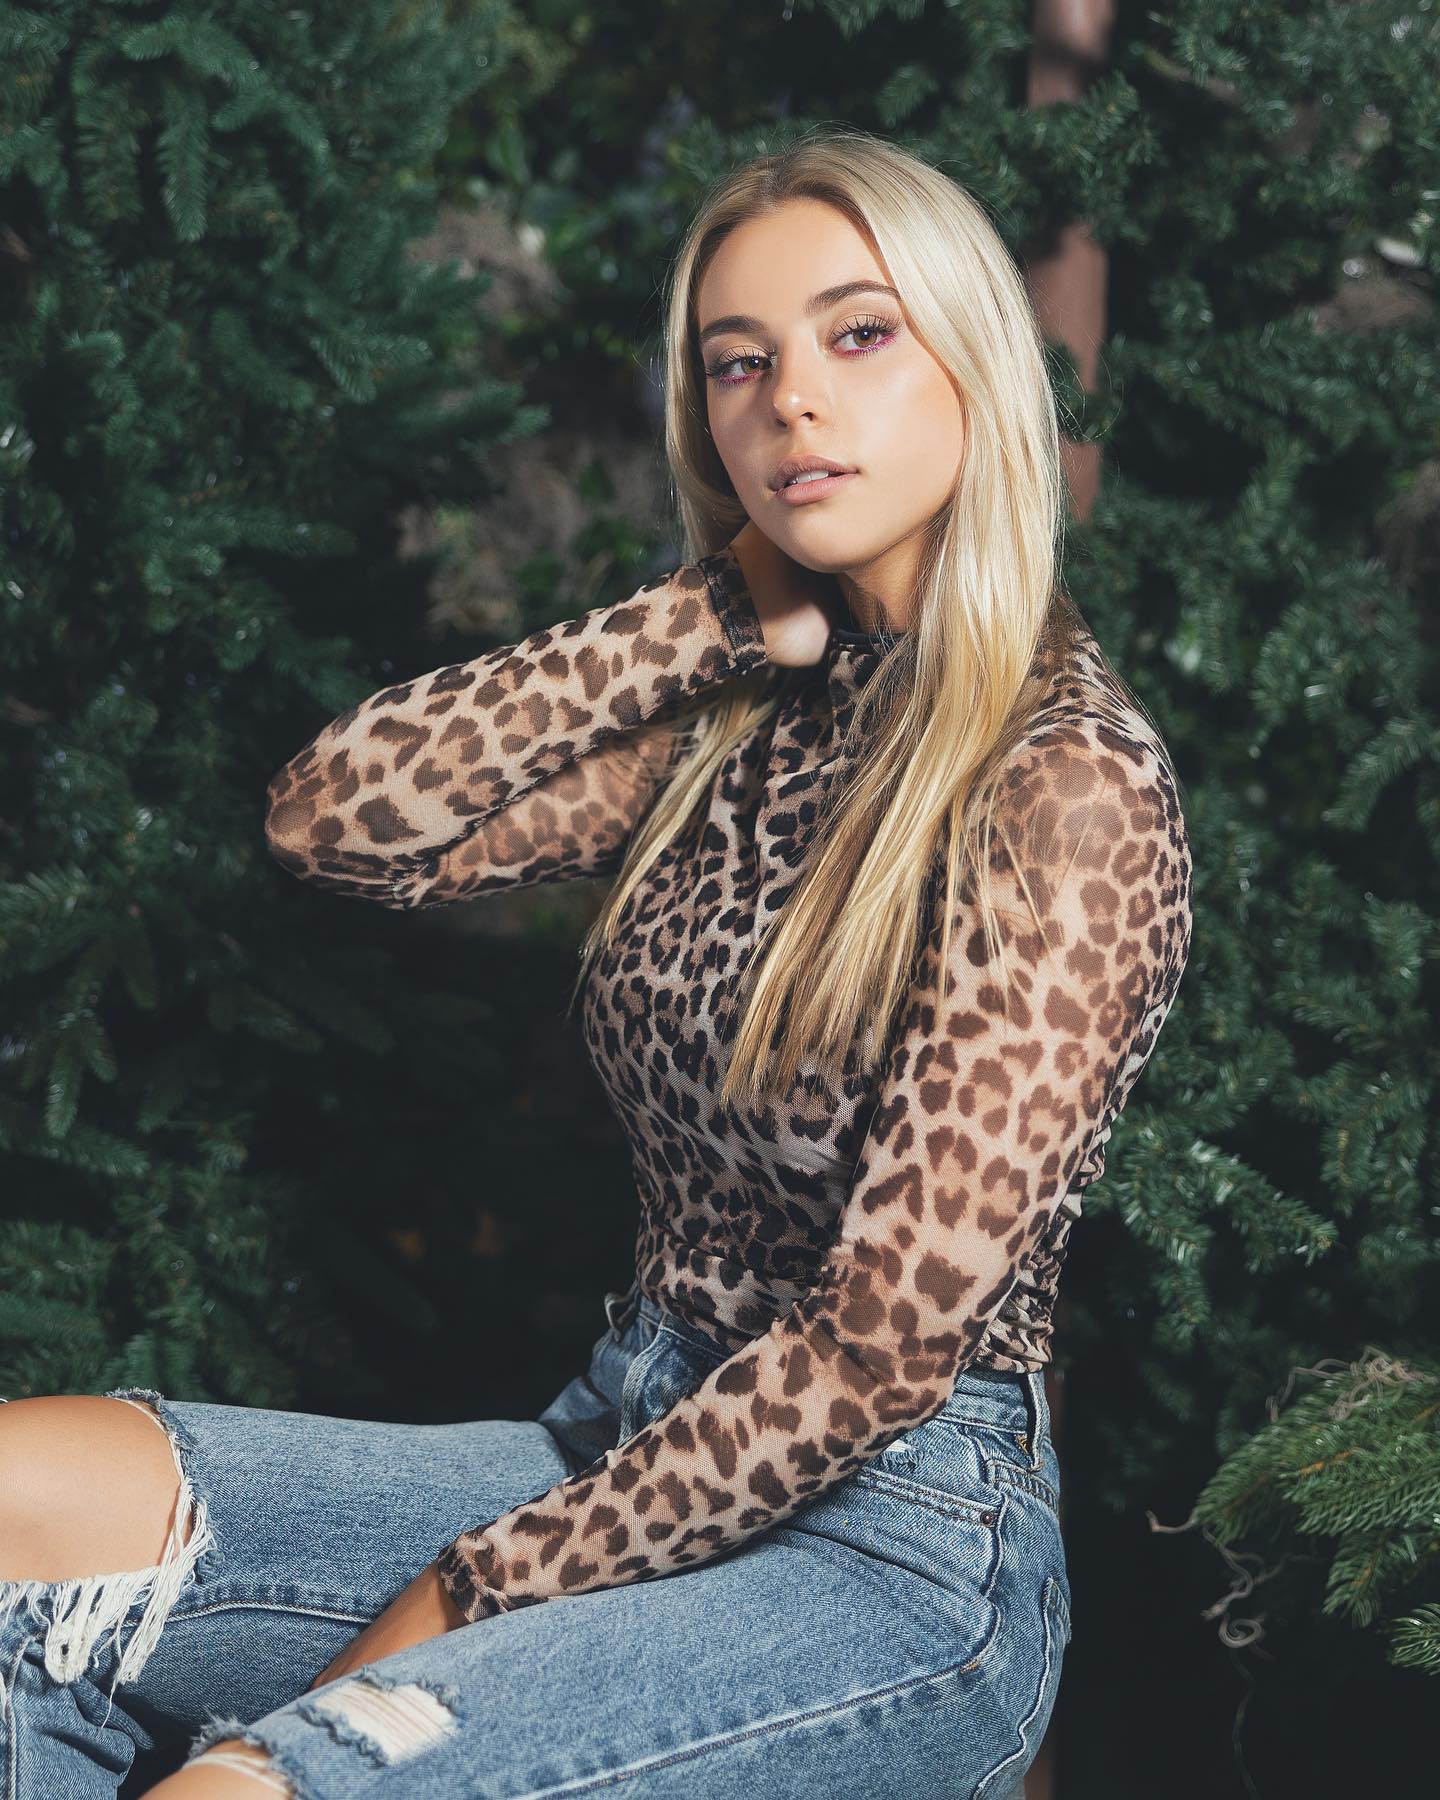 Morgan Raine wore a Animal Print Top and Denim in Photoshoot at Texas